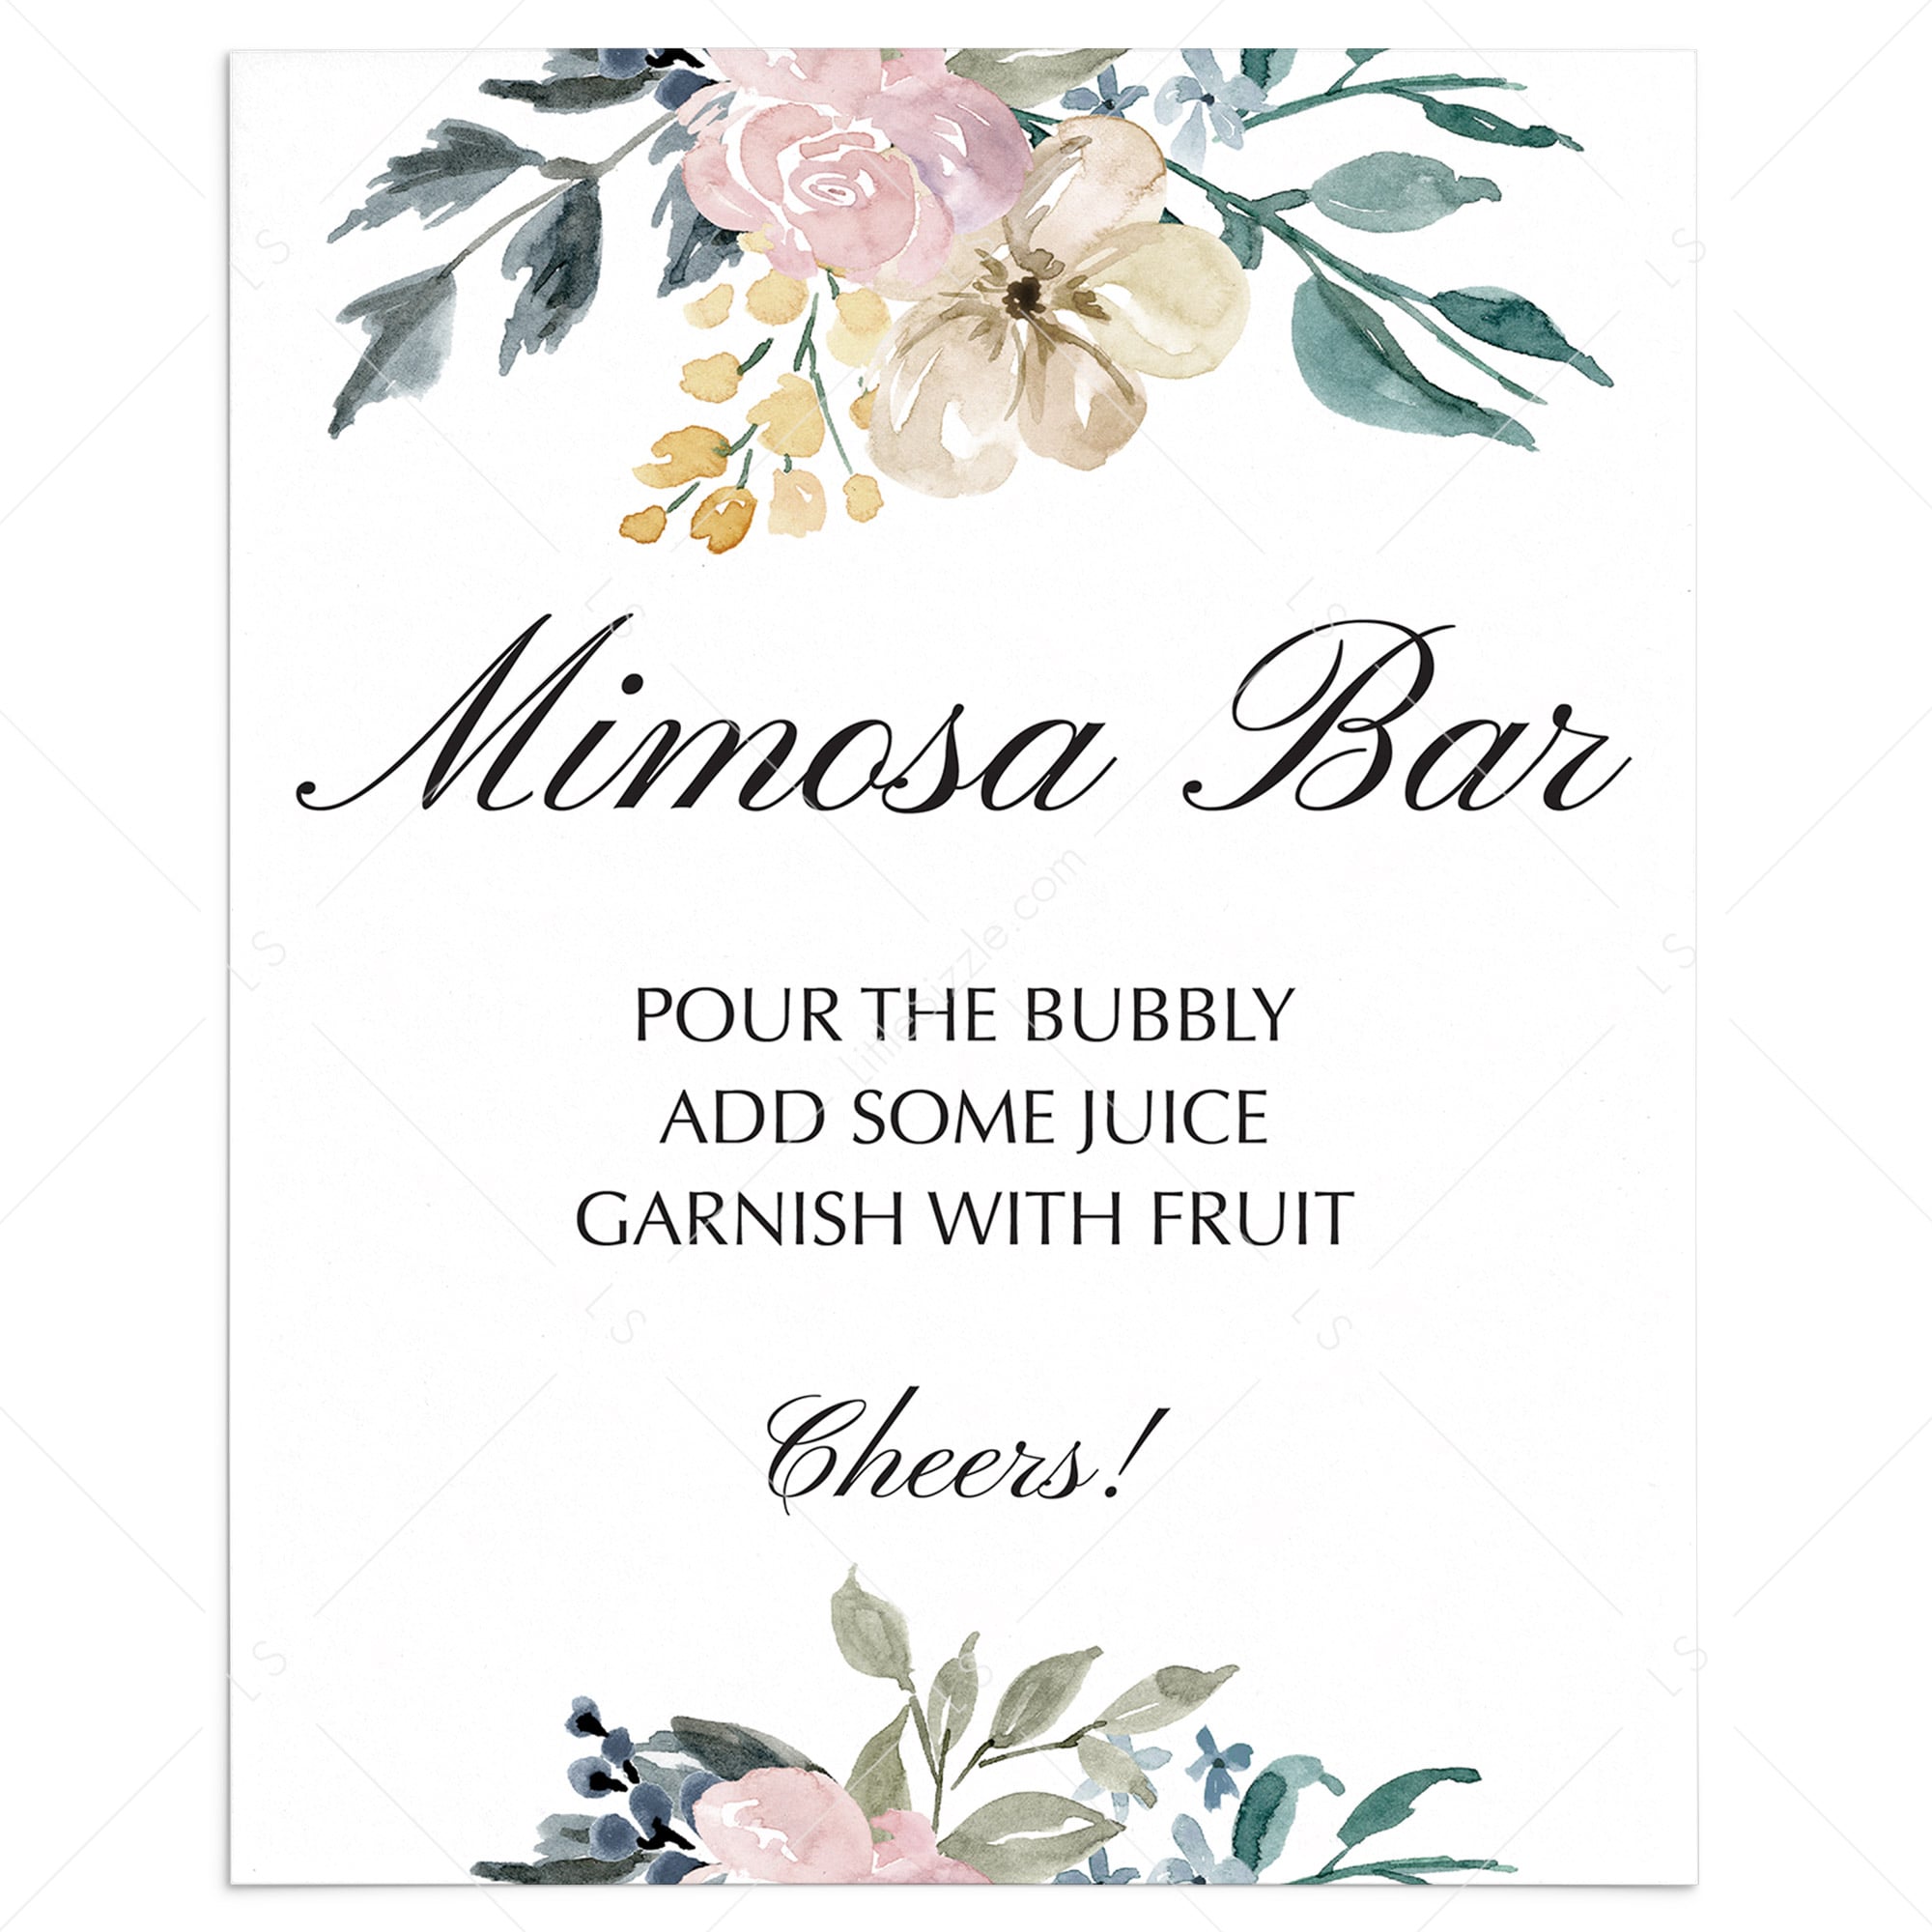 Printable Mimosa sign for floral themed shower | Instant download